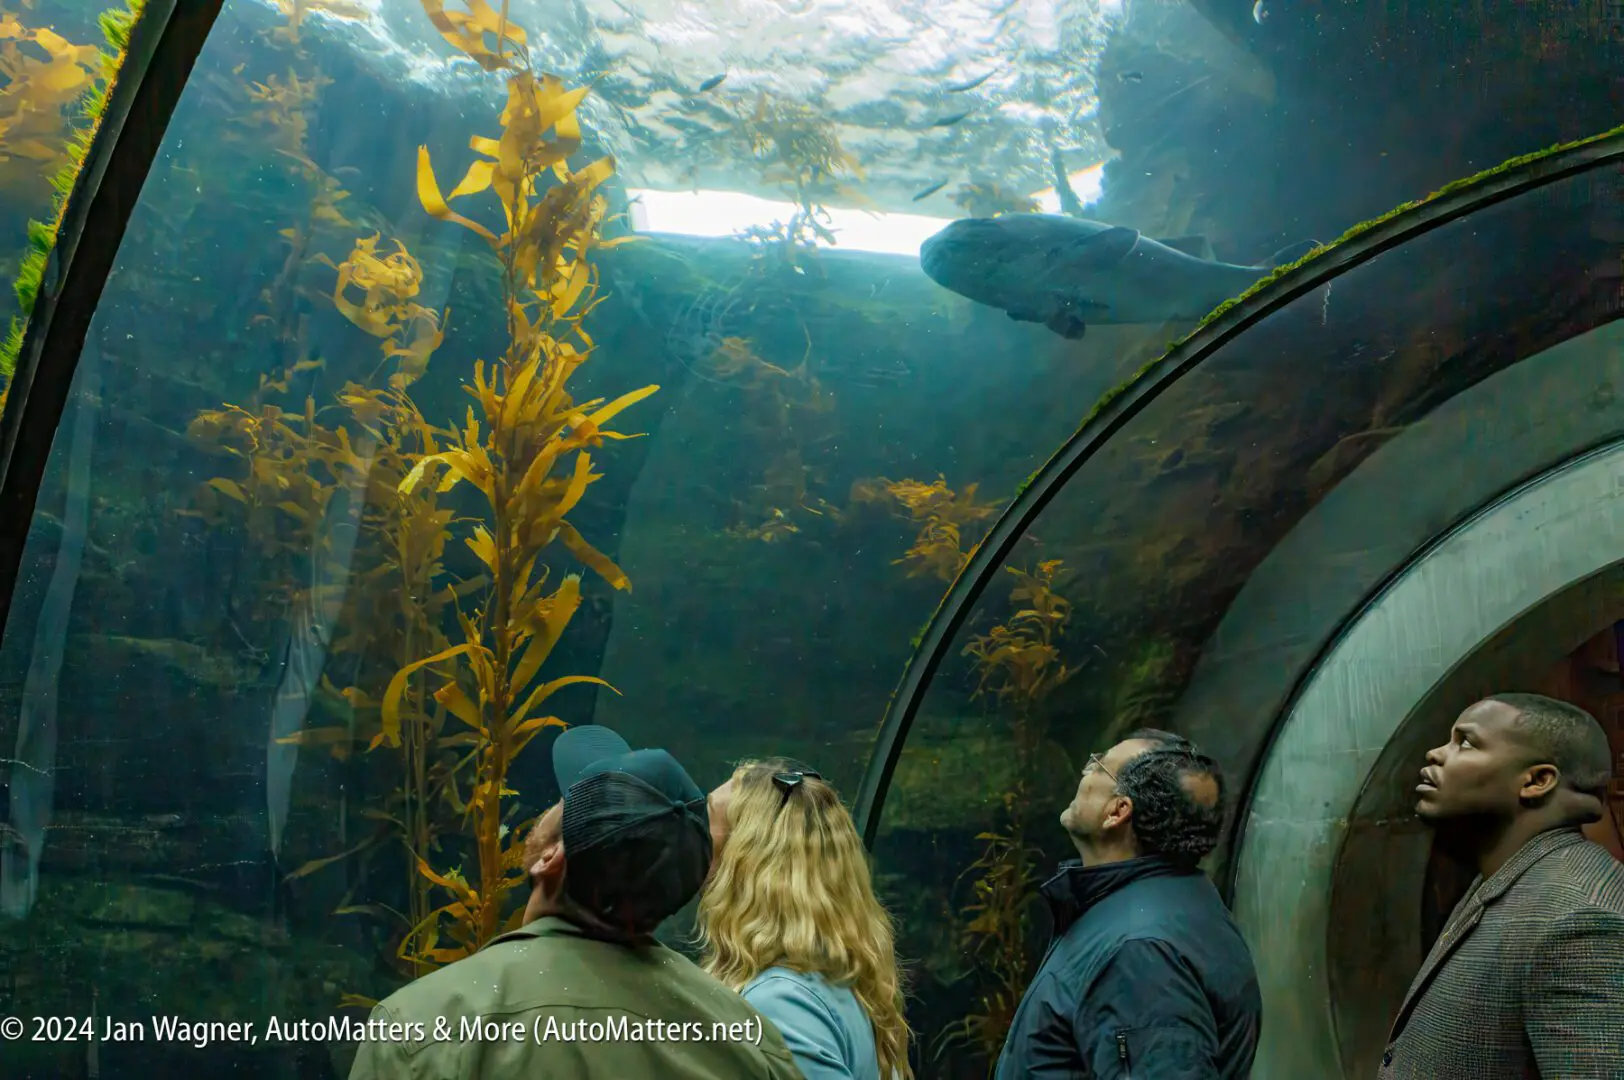 A group of people in a tunnel looking at an aquarium.